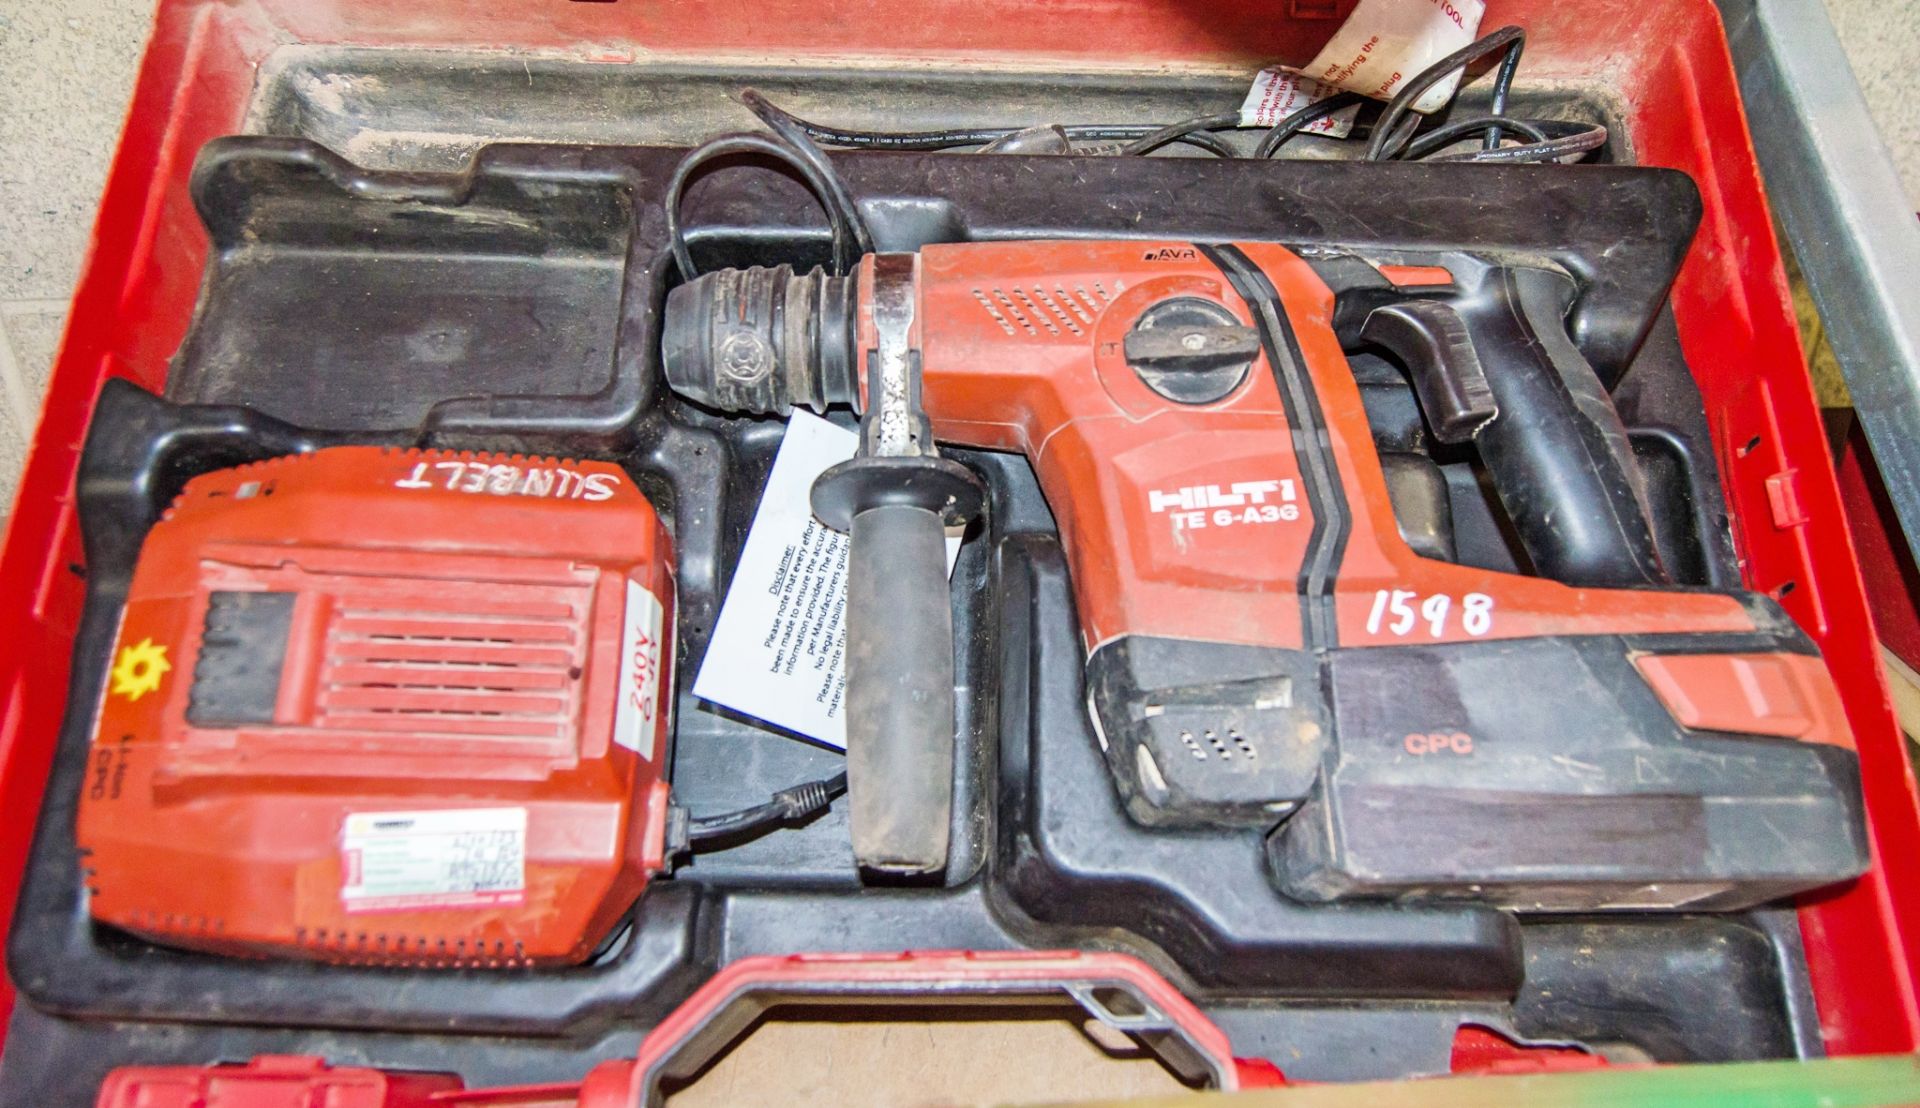 Hilti TE6-A36 36v cordless SDS rotary hammer drill c/w battery charger and carry case A957875